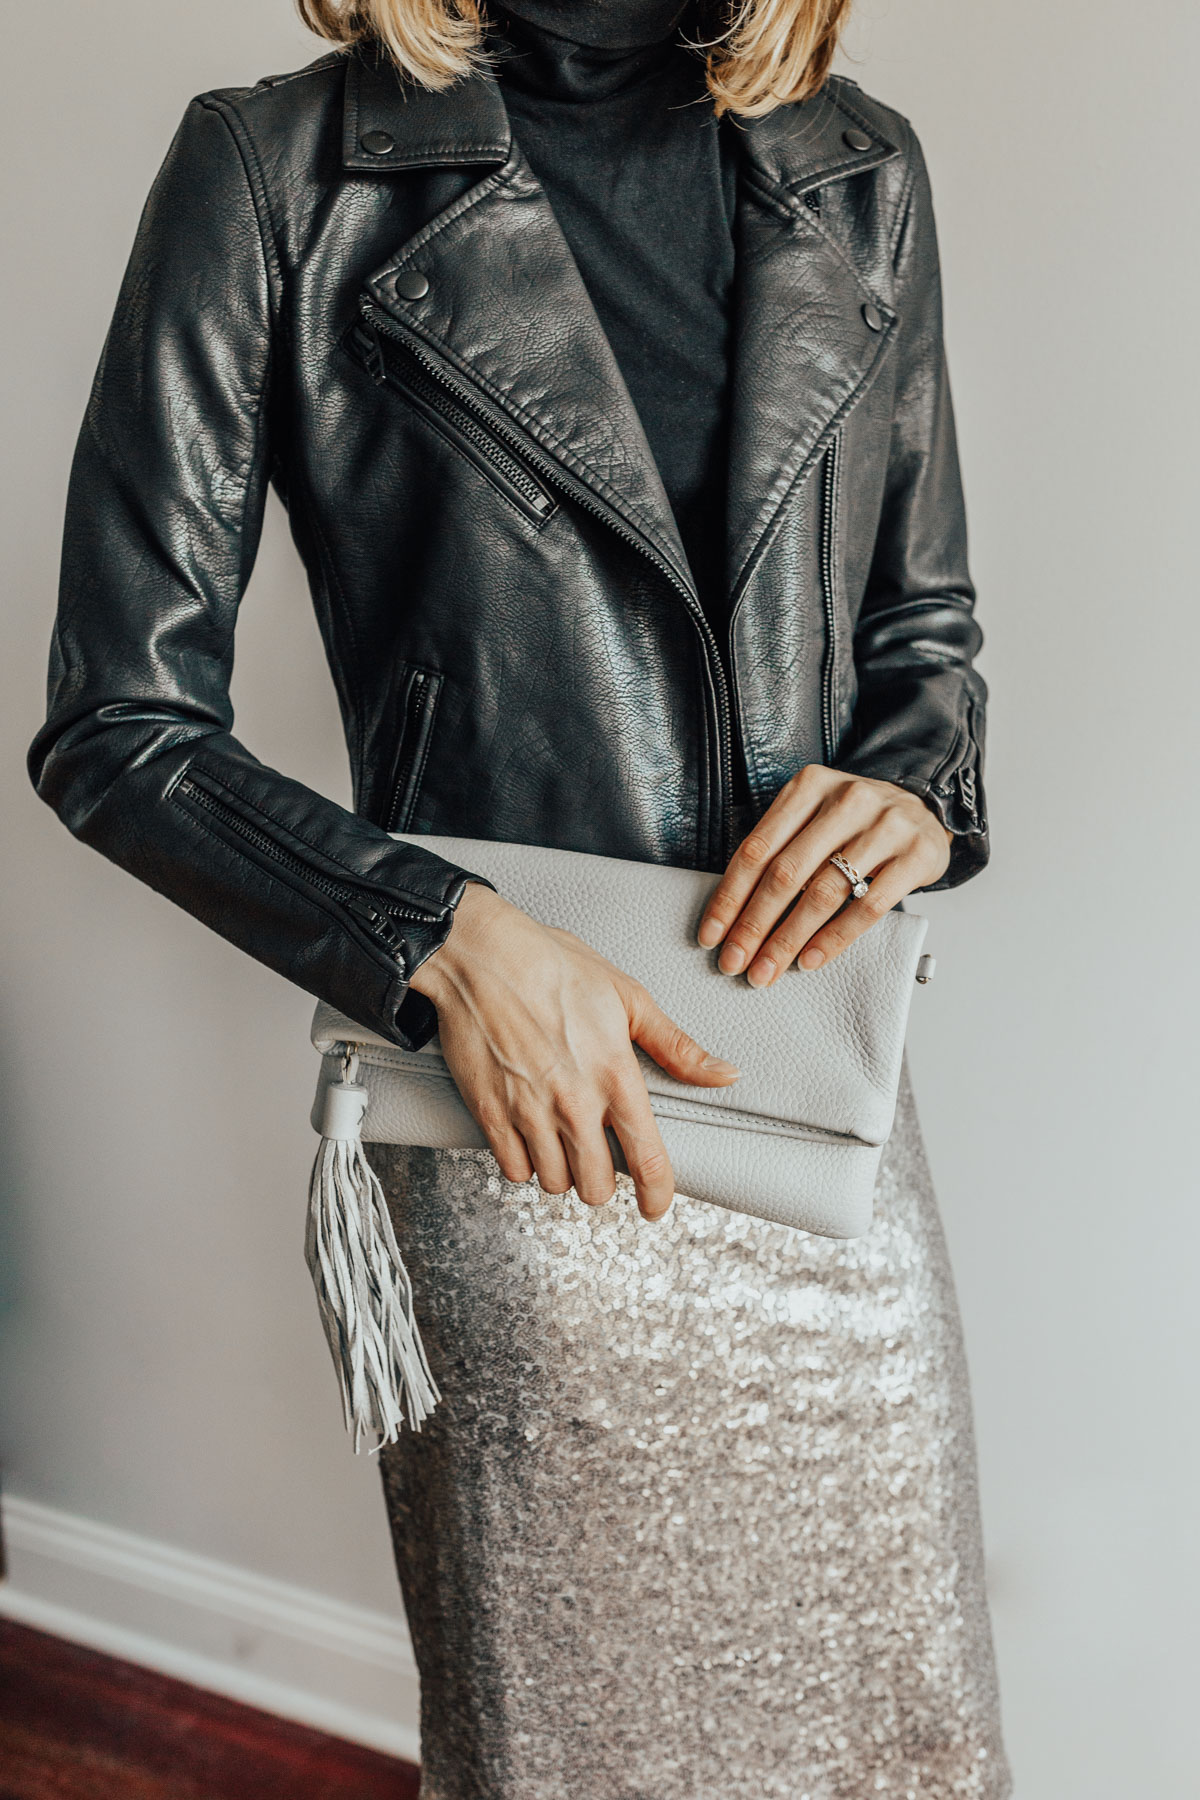 what to wear leather jacket